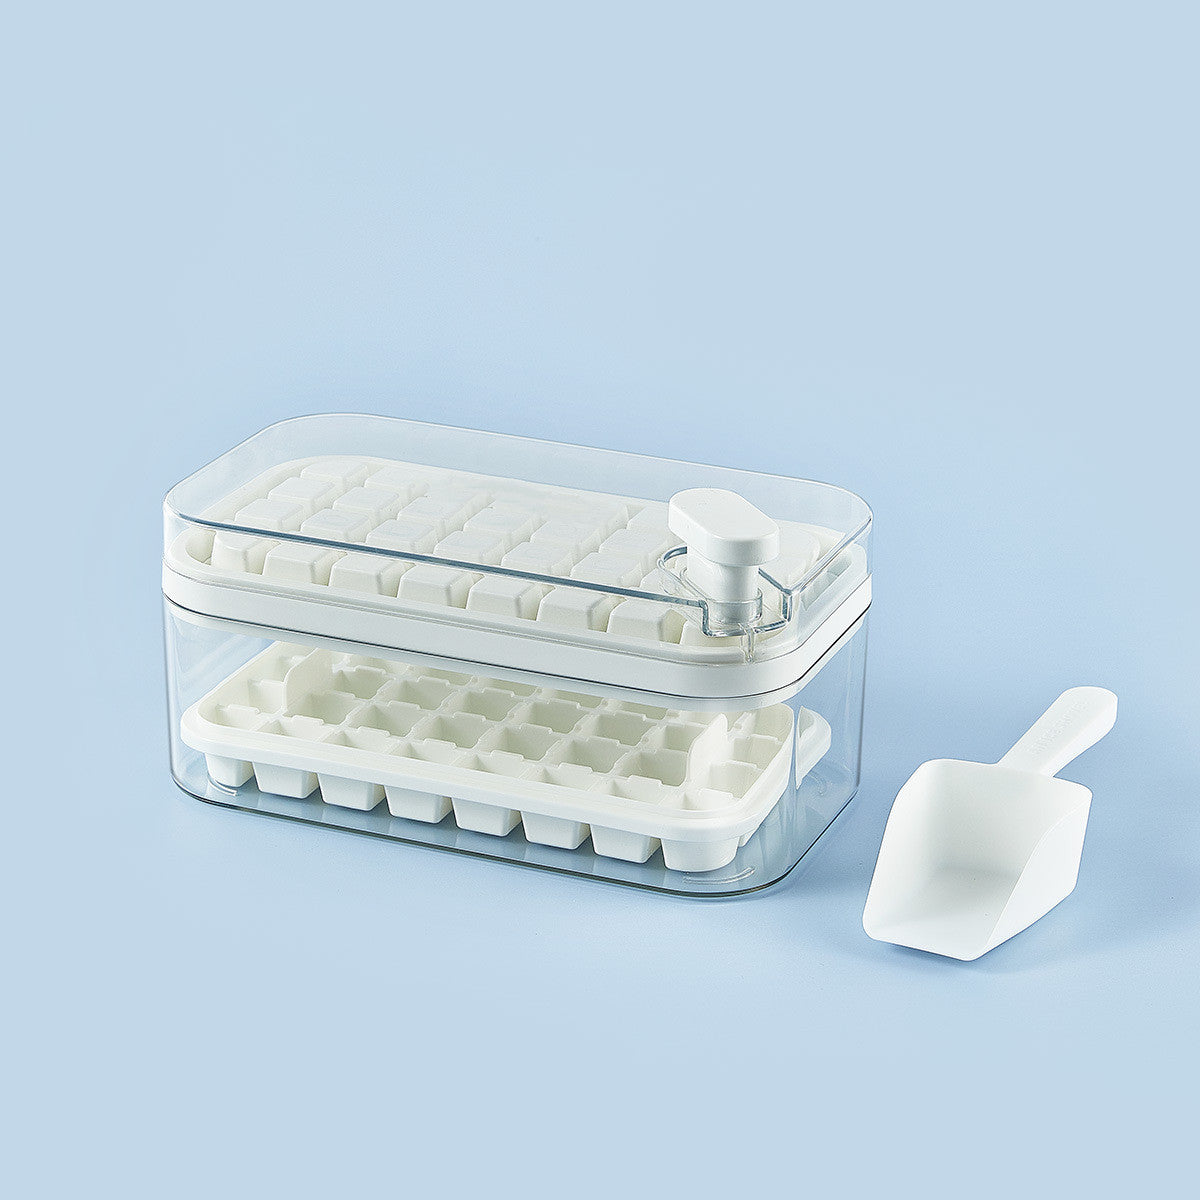 One-Button Press Type Ice Mold Box - Ice Cube Maker with Storage Box and Lid